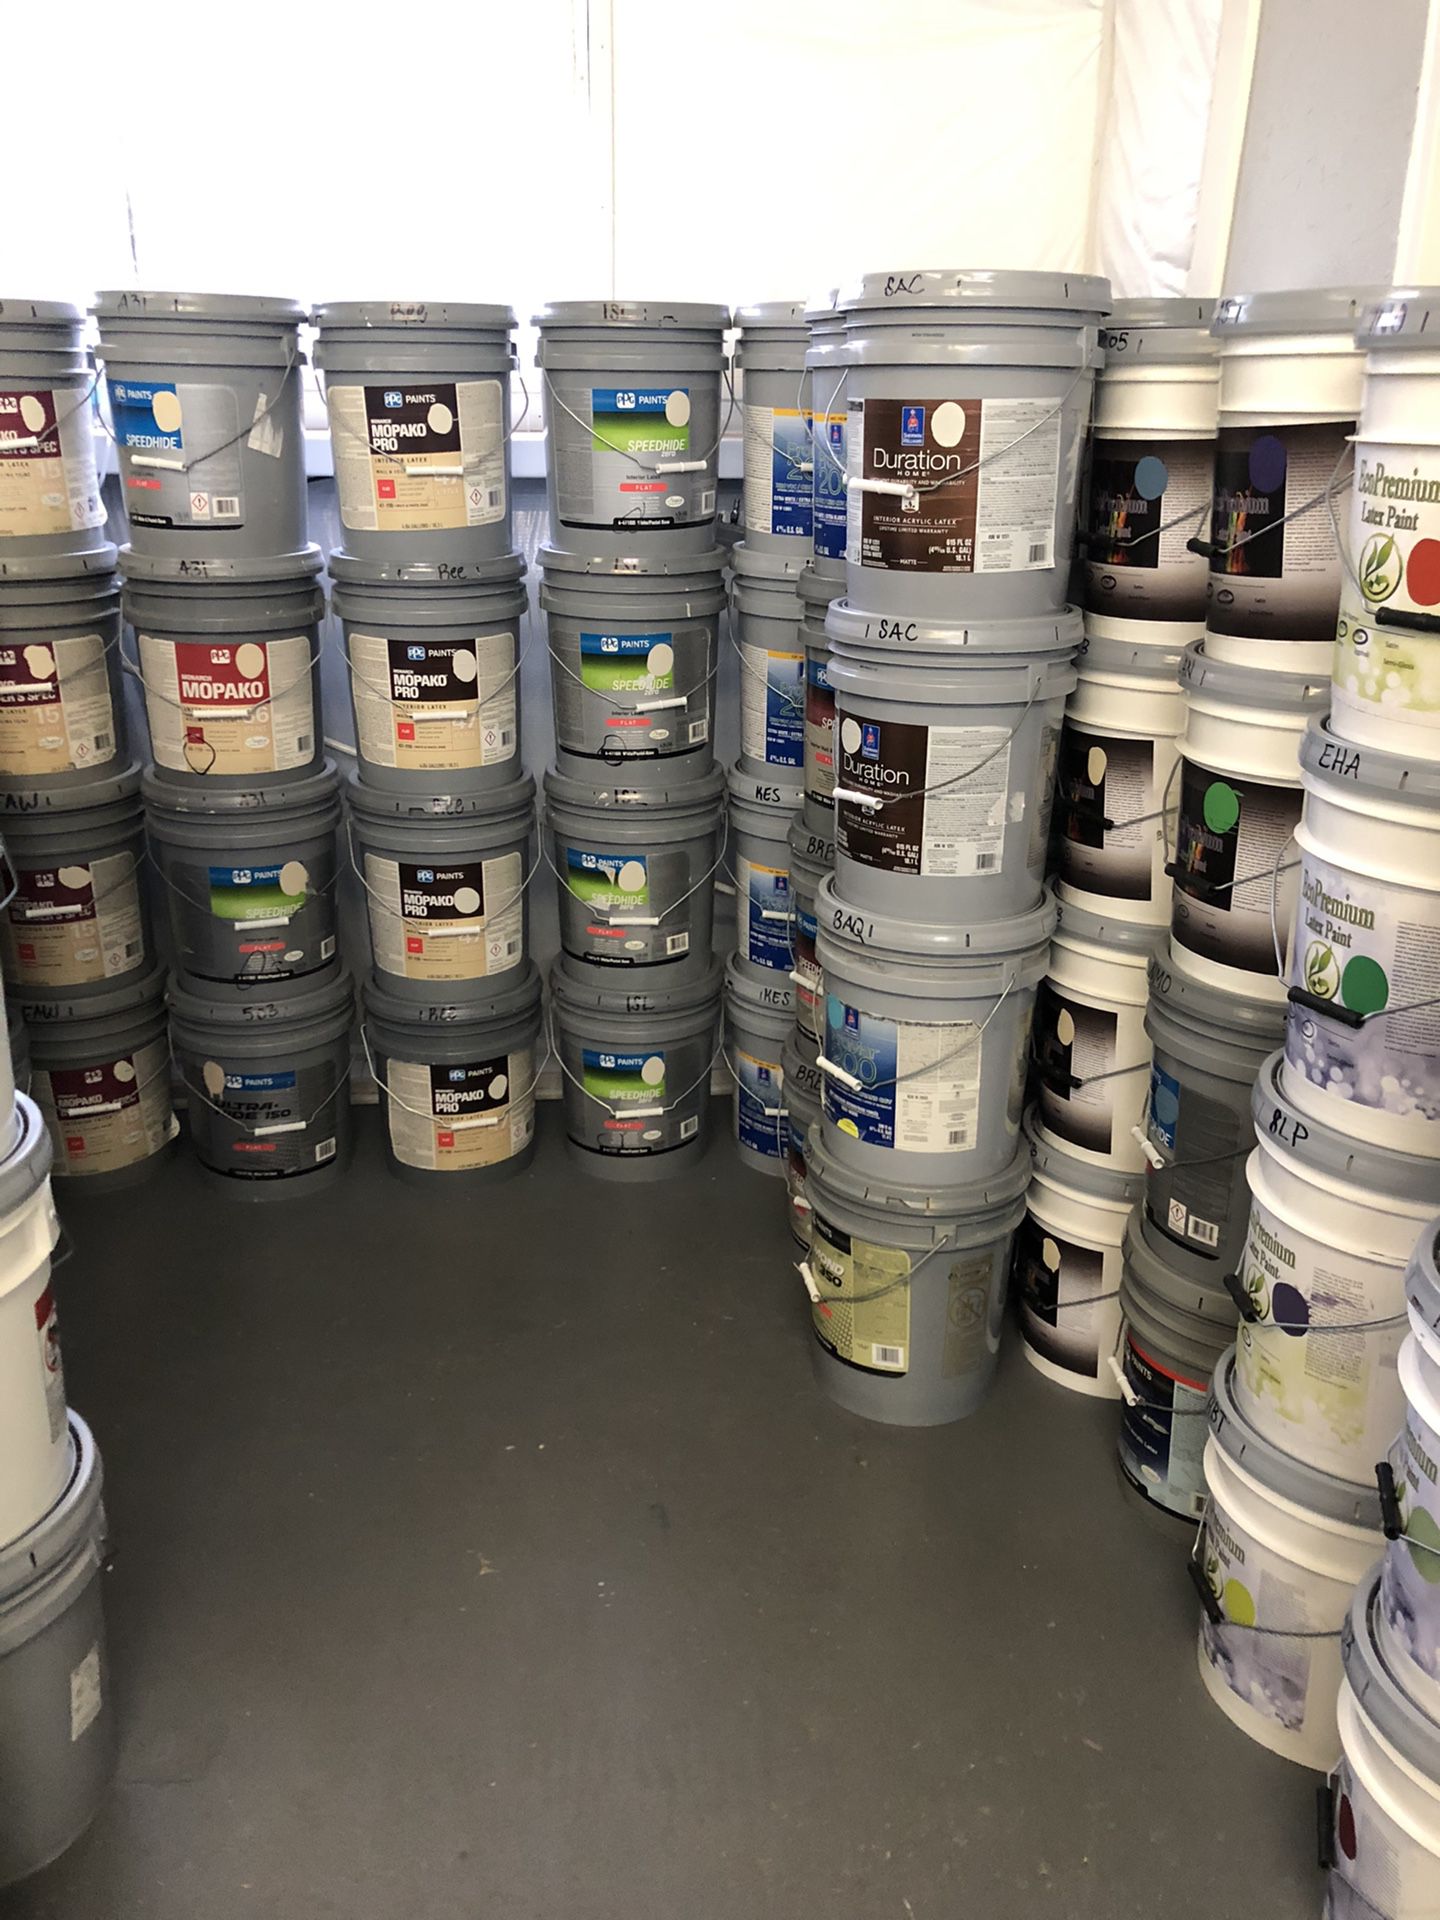 5 Gallon Buckets of Interior Paint for Sale